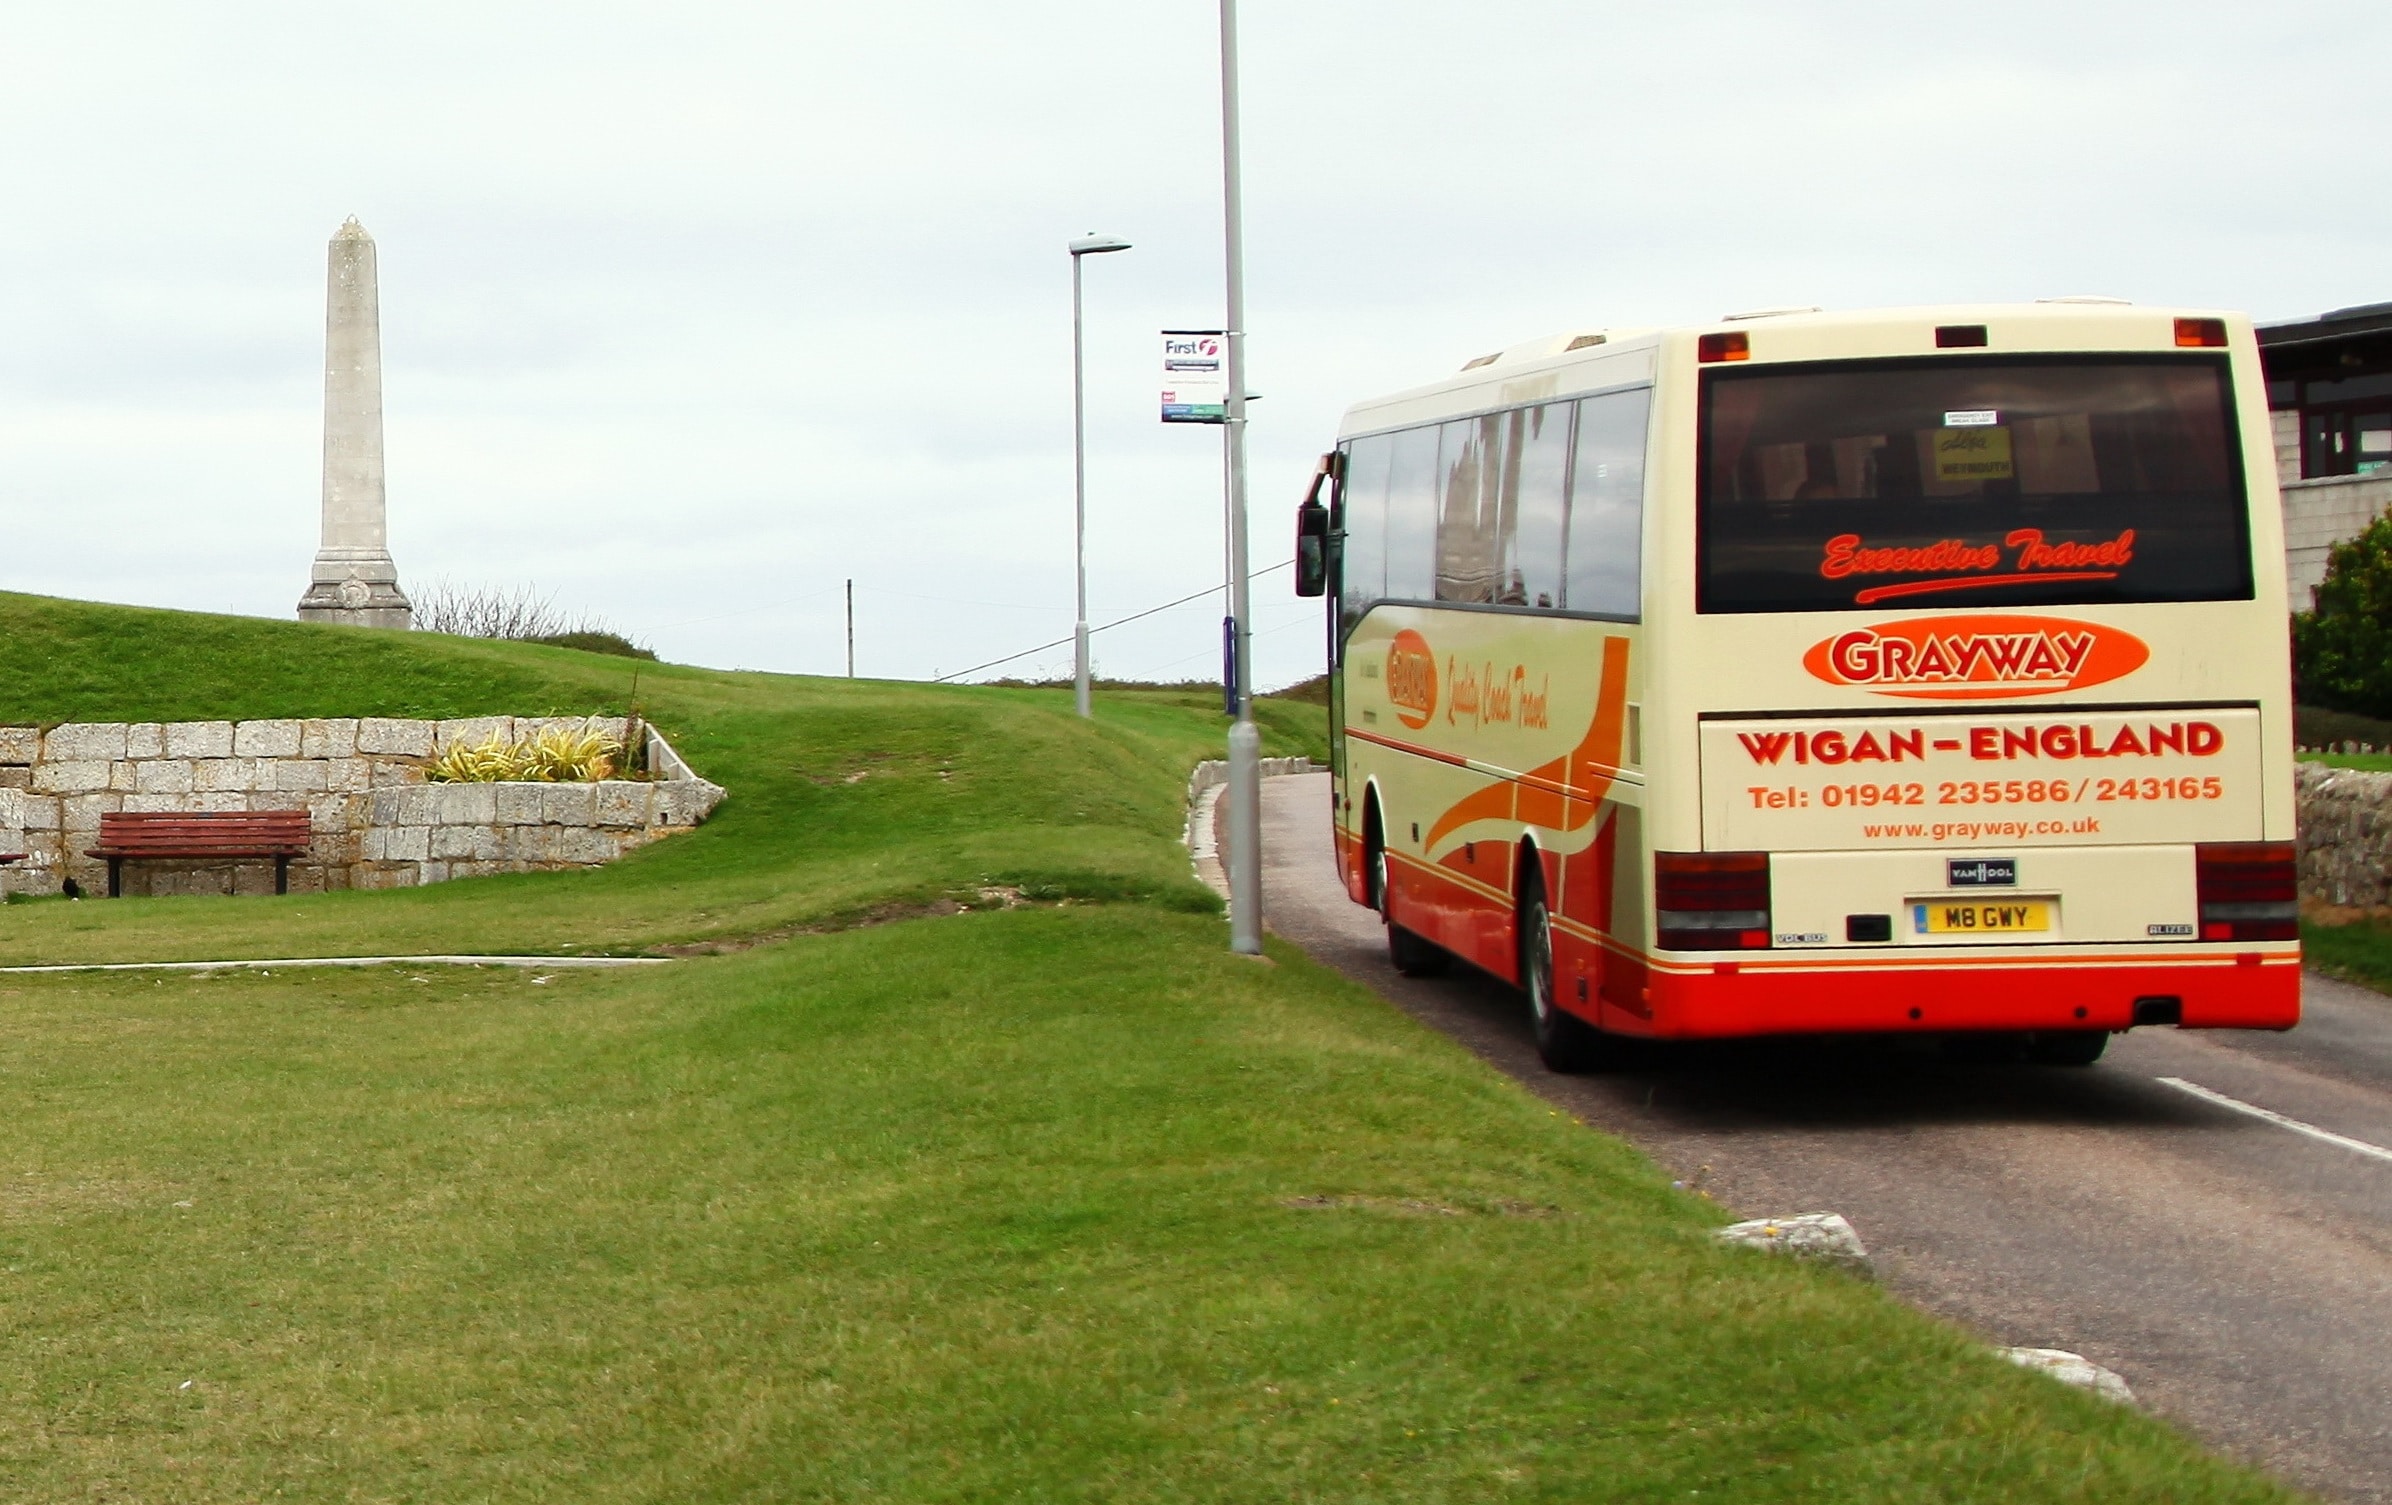 Coach tour operators in England excluded from Restart Grant payments